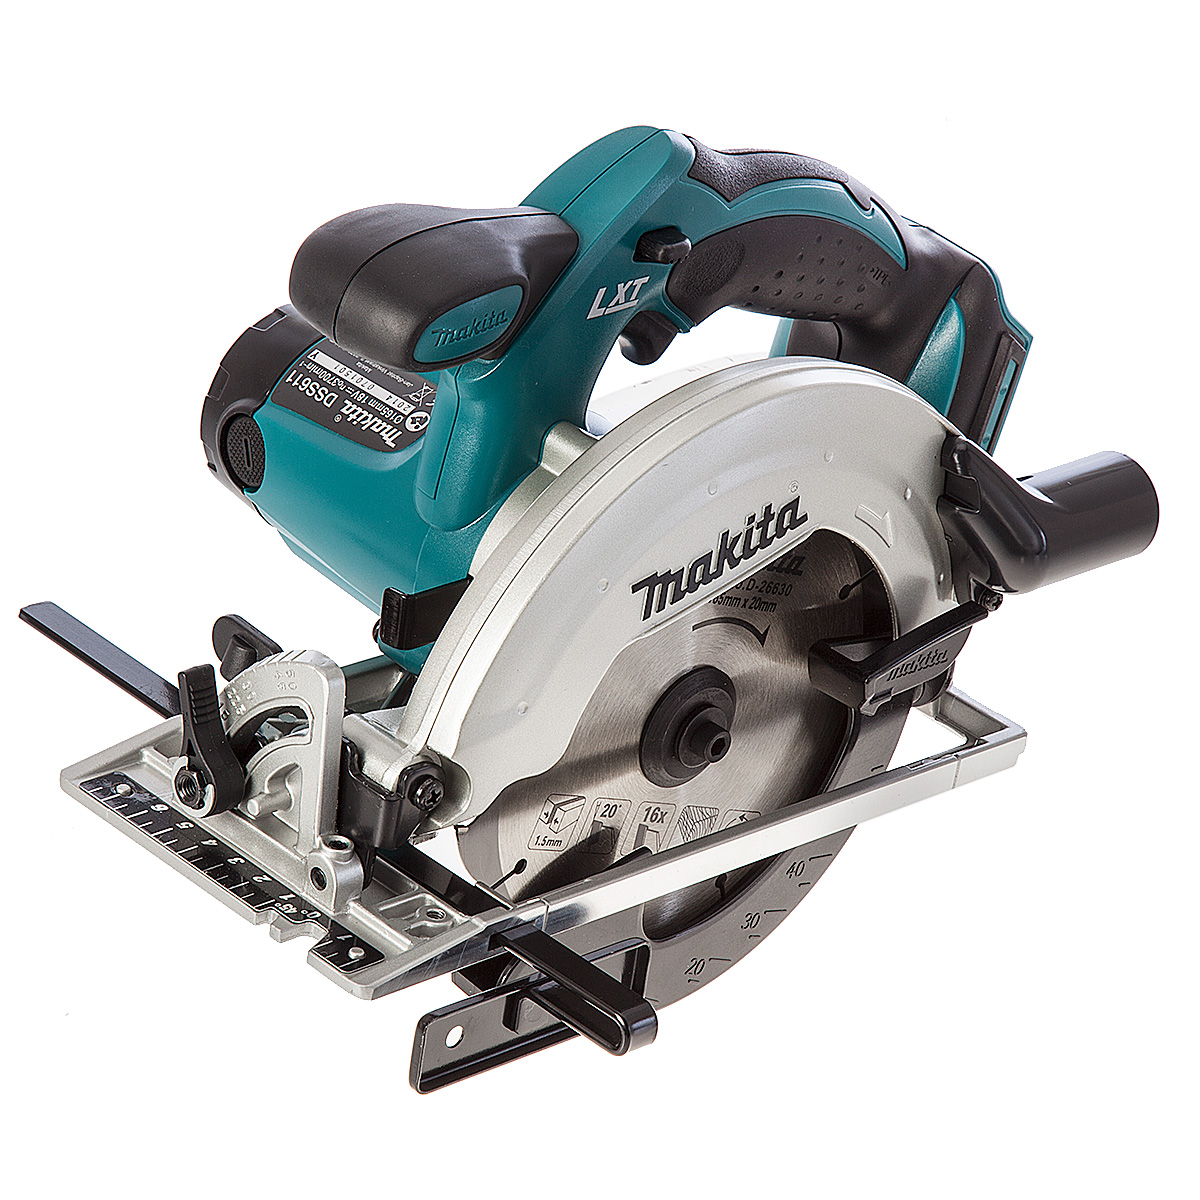 Makita DSS611 18V Brushed 165mm Circular Saw LXT - Body Only